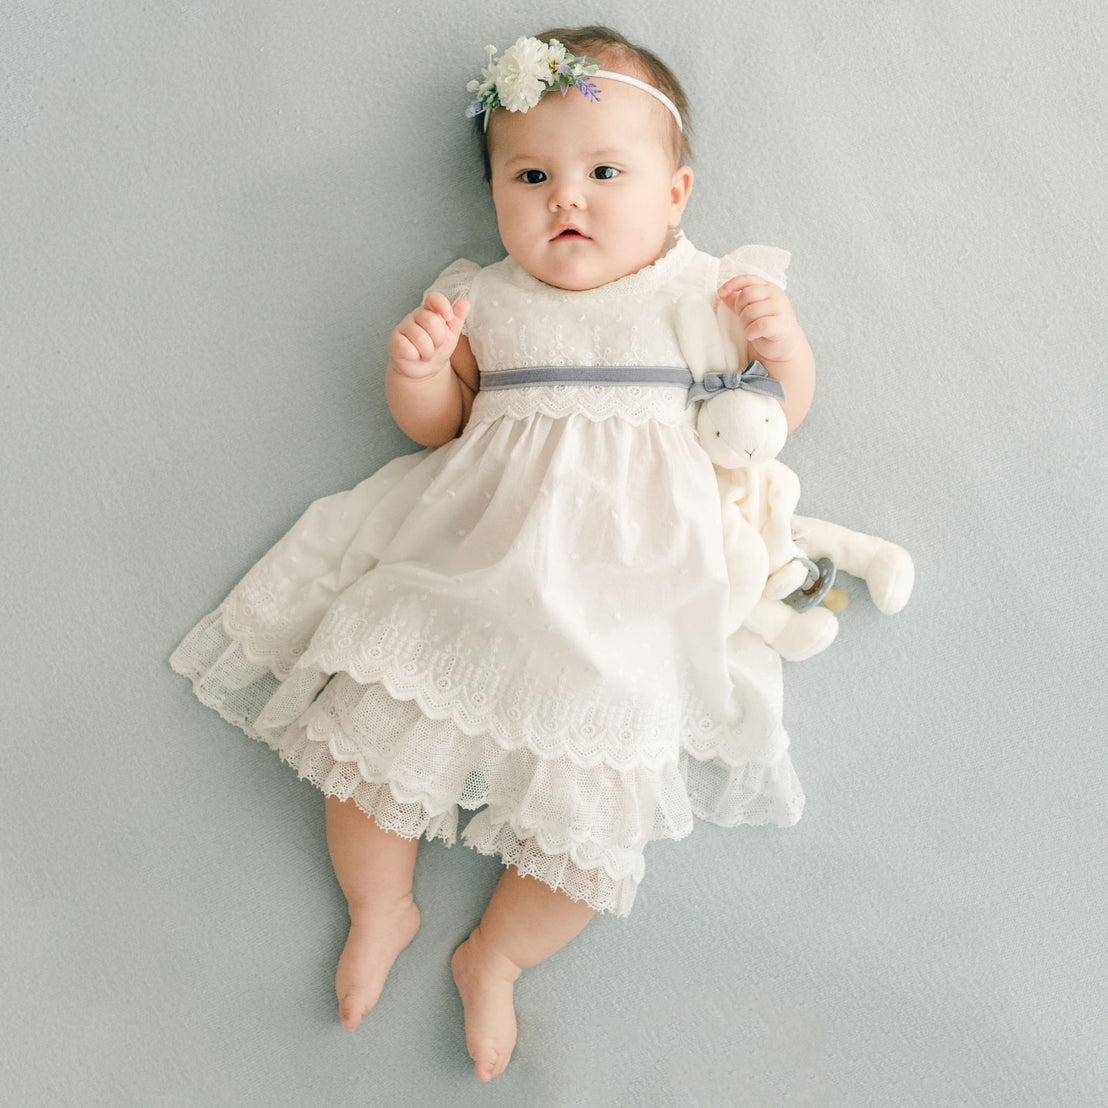 Baby girl wearing the Emily Dress and Bloomers with heather sash. She is also wearing the Emily Flower Headband.